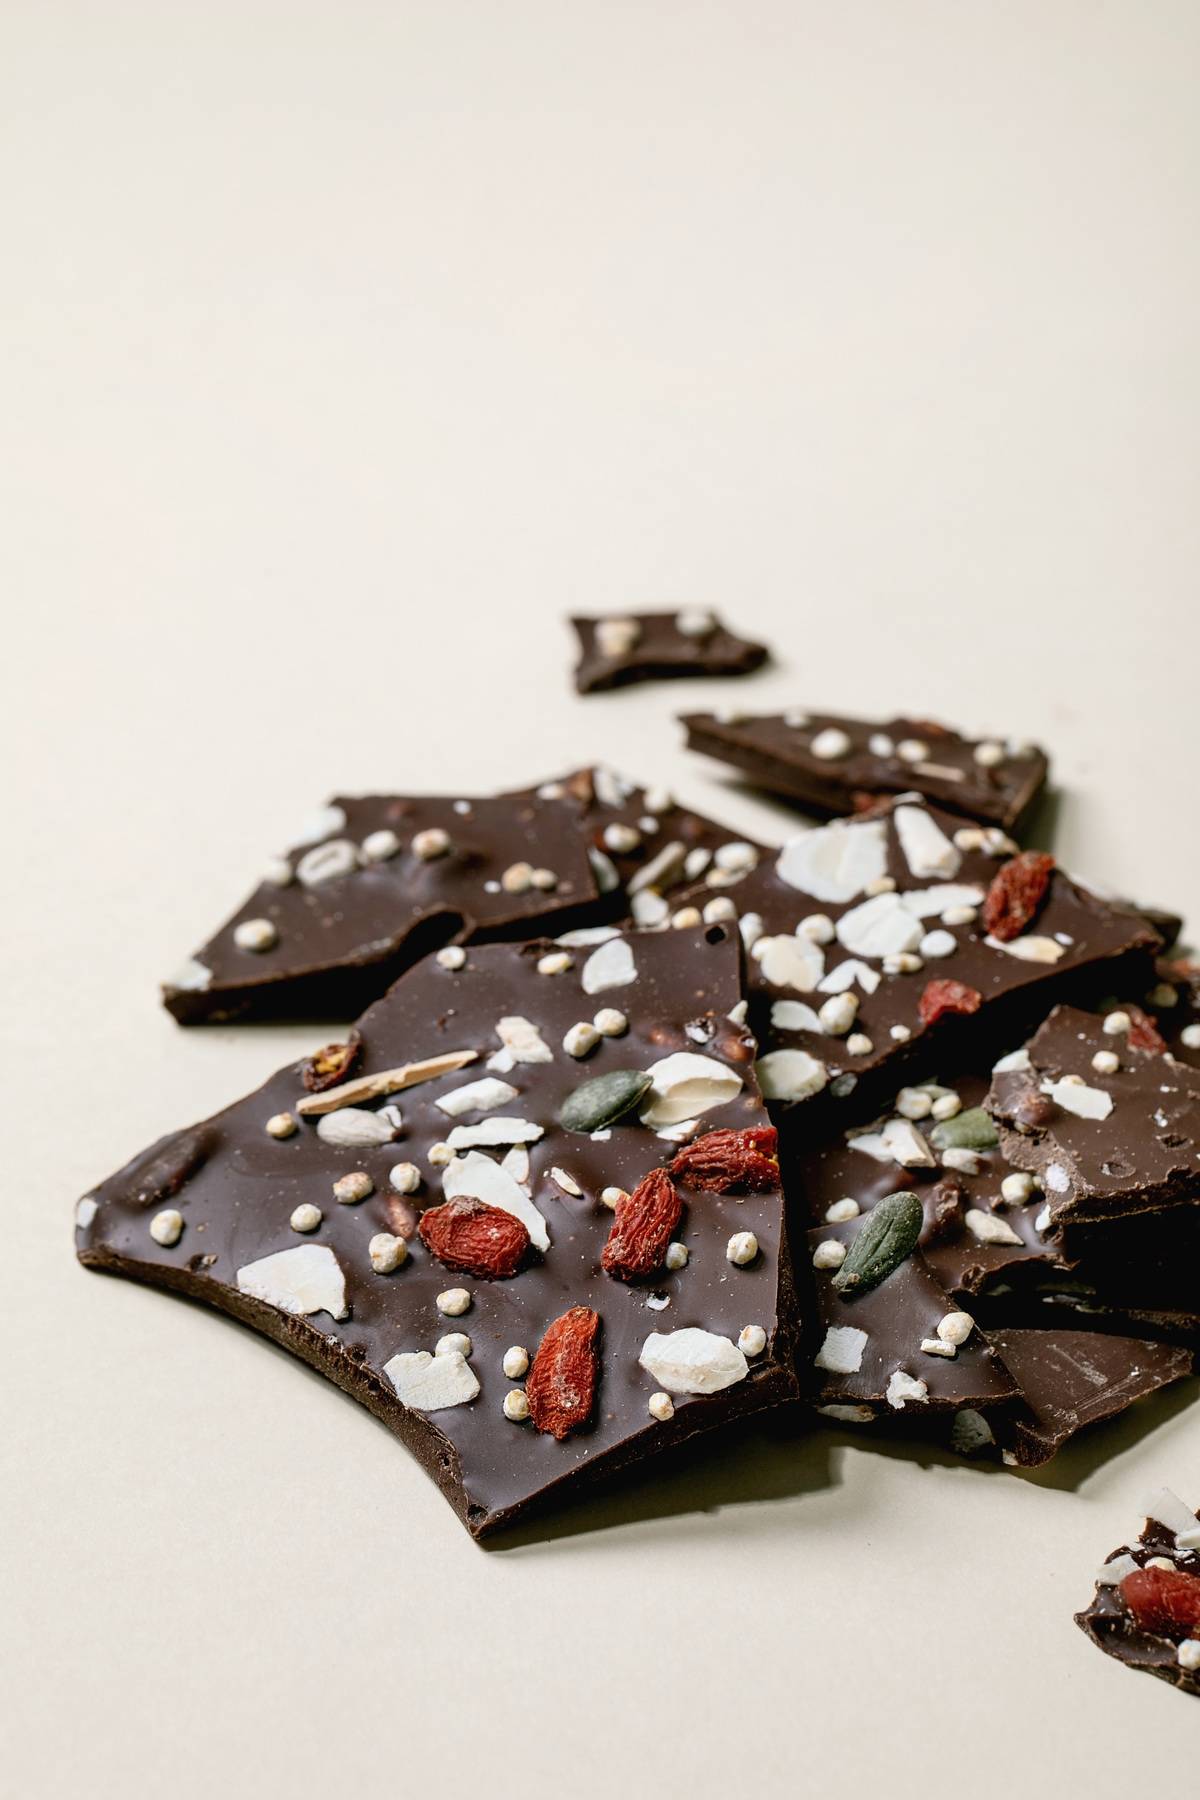 Handmade chopped dark chocolate with different superfood additives seeds and goji berries over beige background.